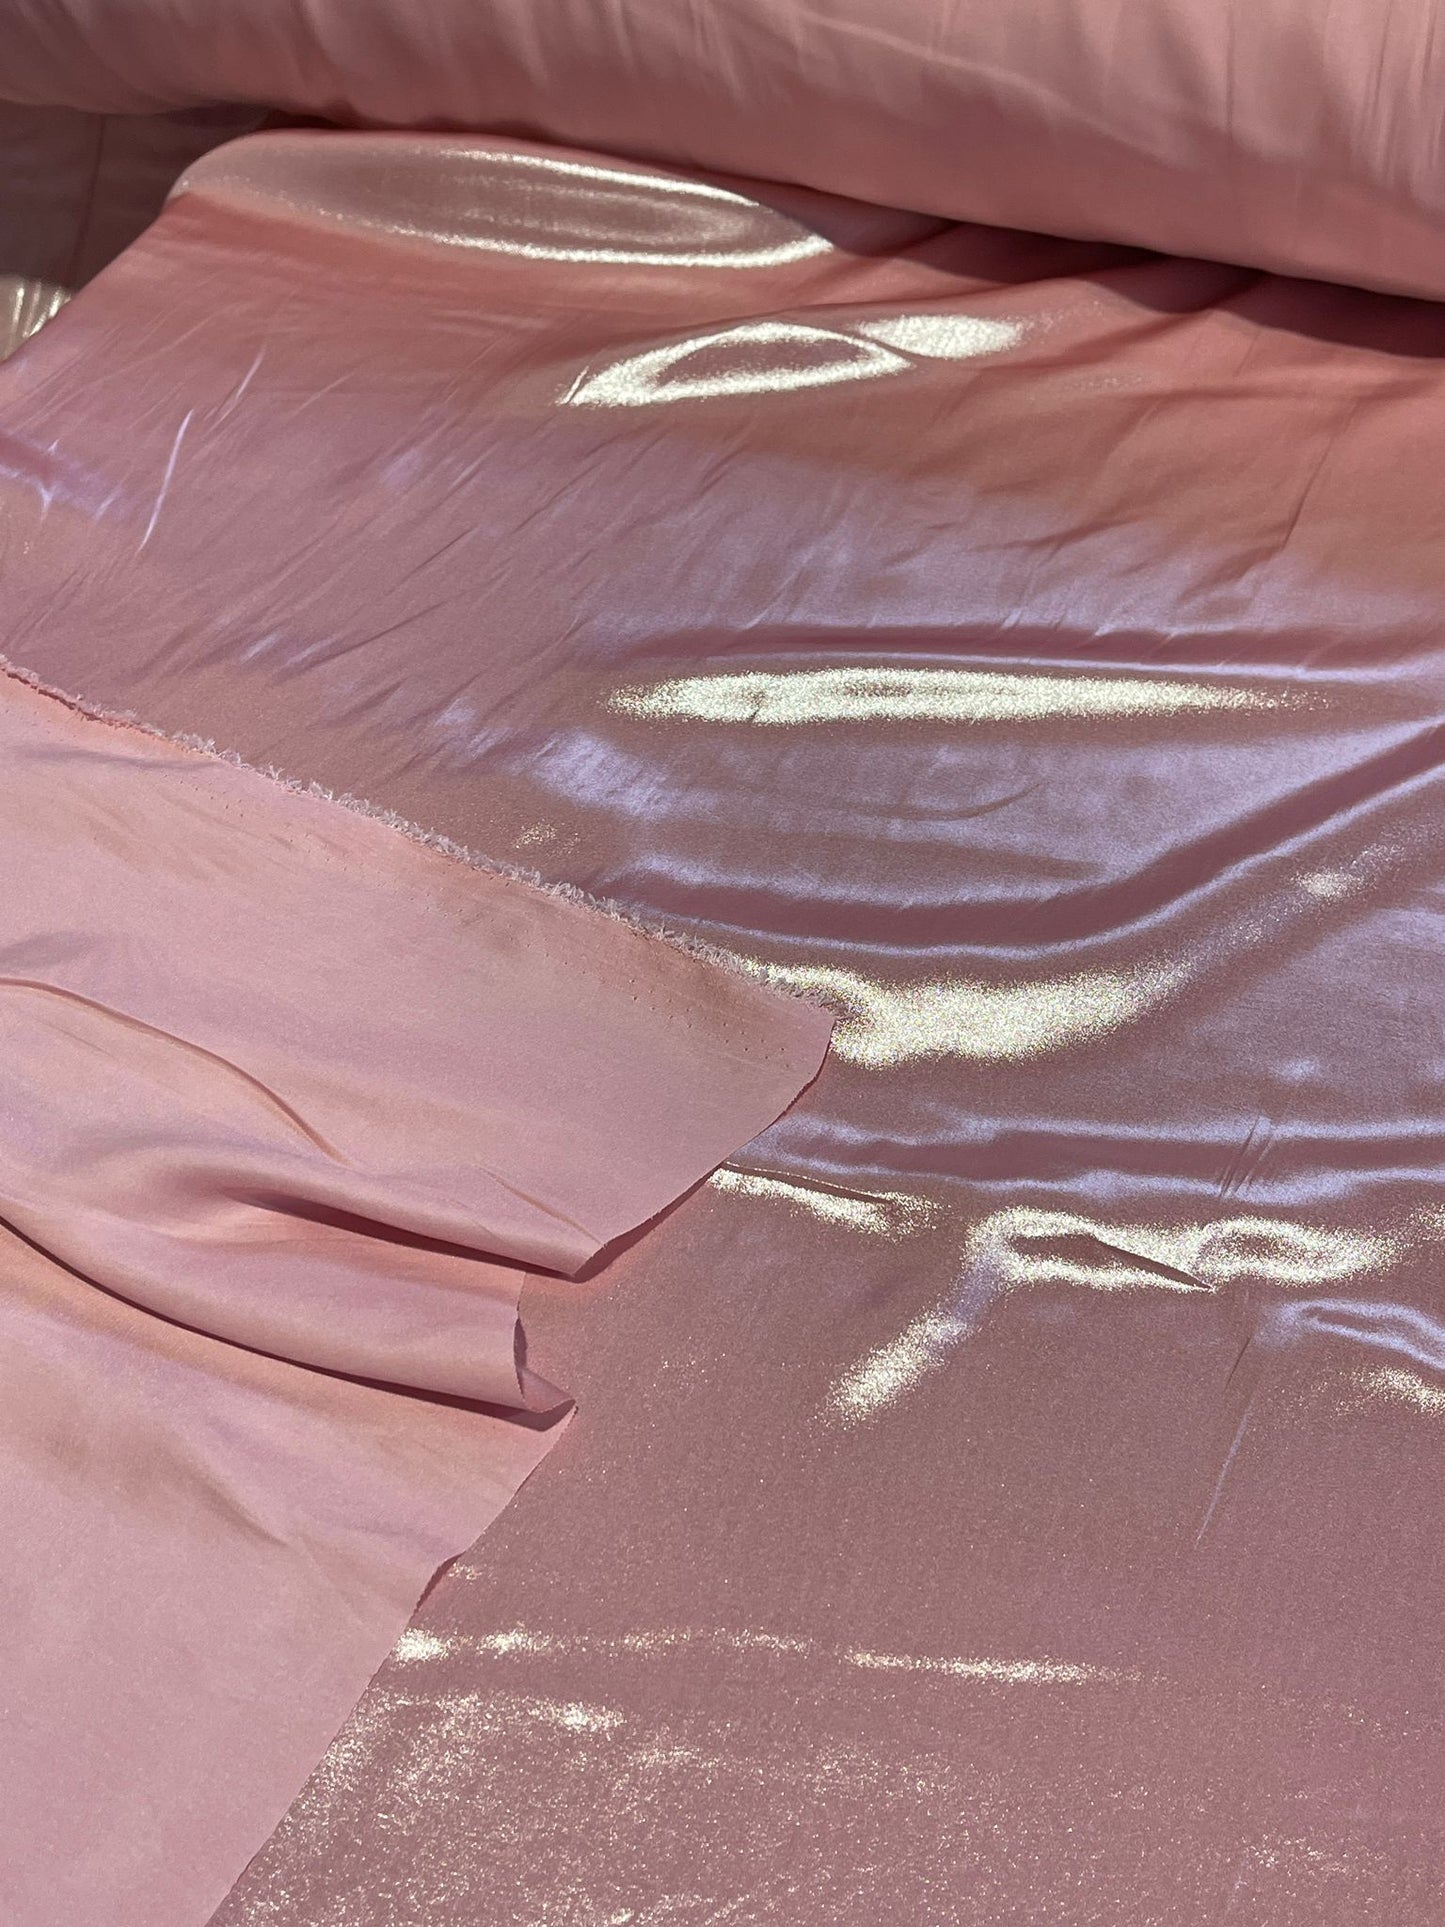 LUX intense pink shiny polyester fabric